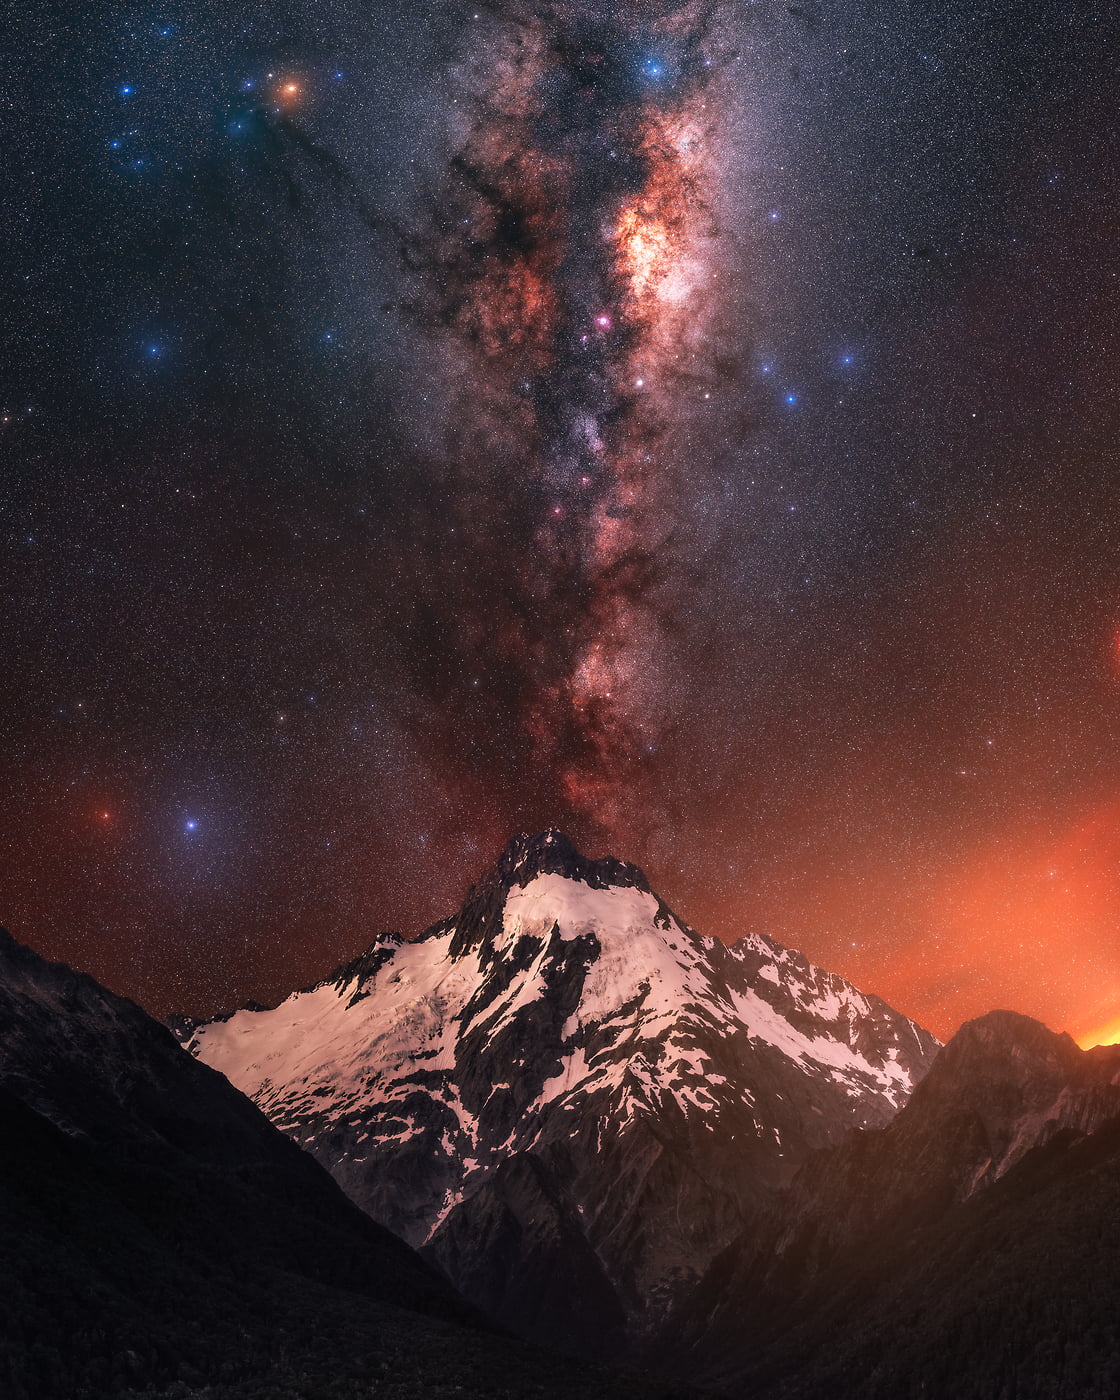 229 megapixels! A very high resolution, large-format VAST photo print of a mountain landscape at night with the Milky Way and stars in the sky and snow covered mountains in the foreground; fine art astrophotography photo created by Paul Wilson at Mt. Jackson in New Zealand